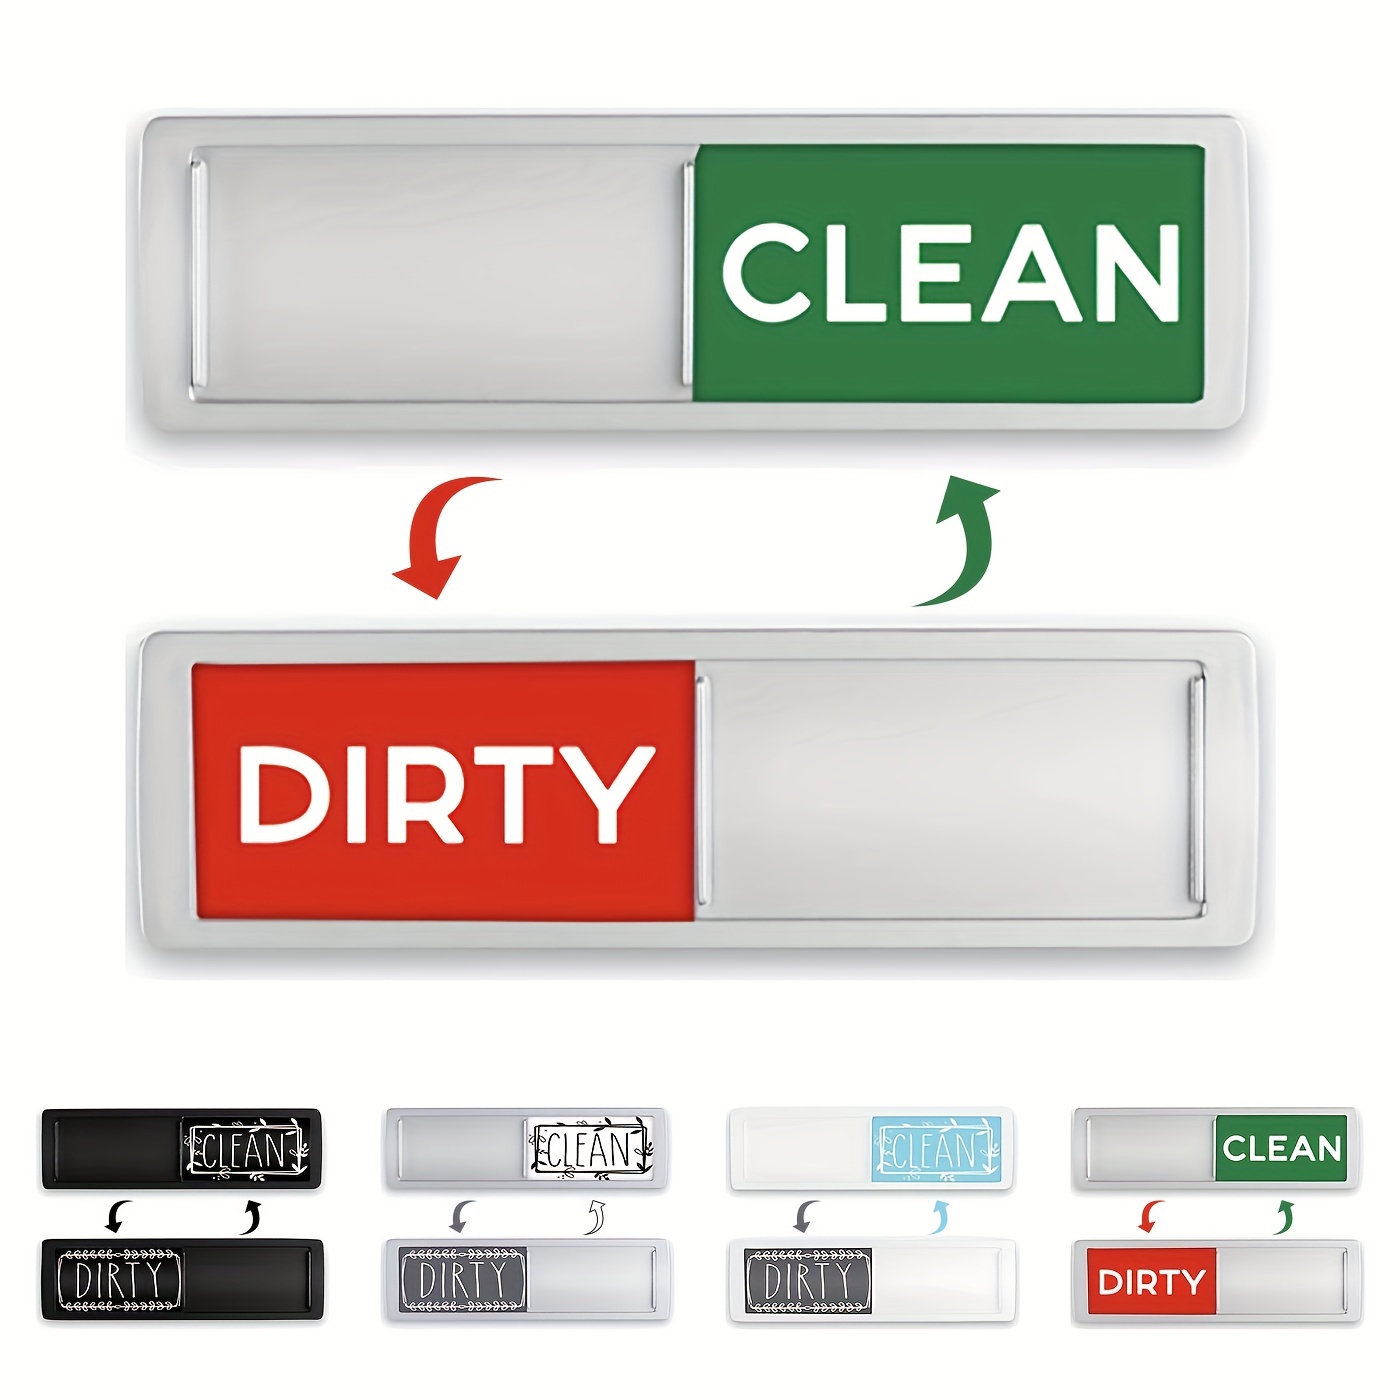 MOONOON Clean Dirty Magnet for Dishwasher,Funny Dishwasher Clean Dirty  Sign, Dishwasher Magnets Show Dirty/Clean Dishes for Kitchen/Laundry Room